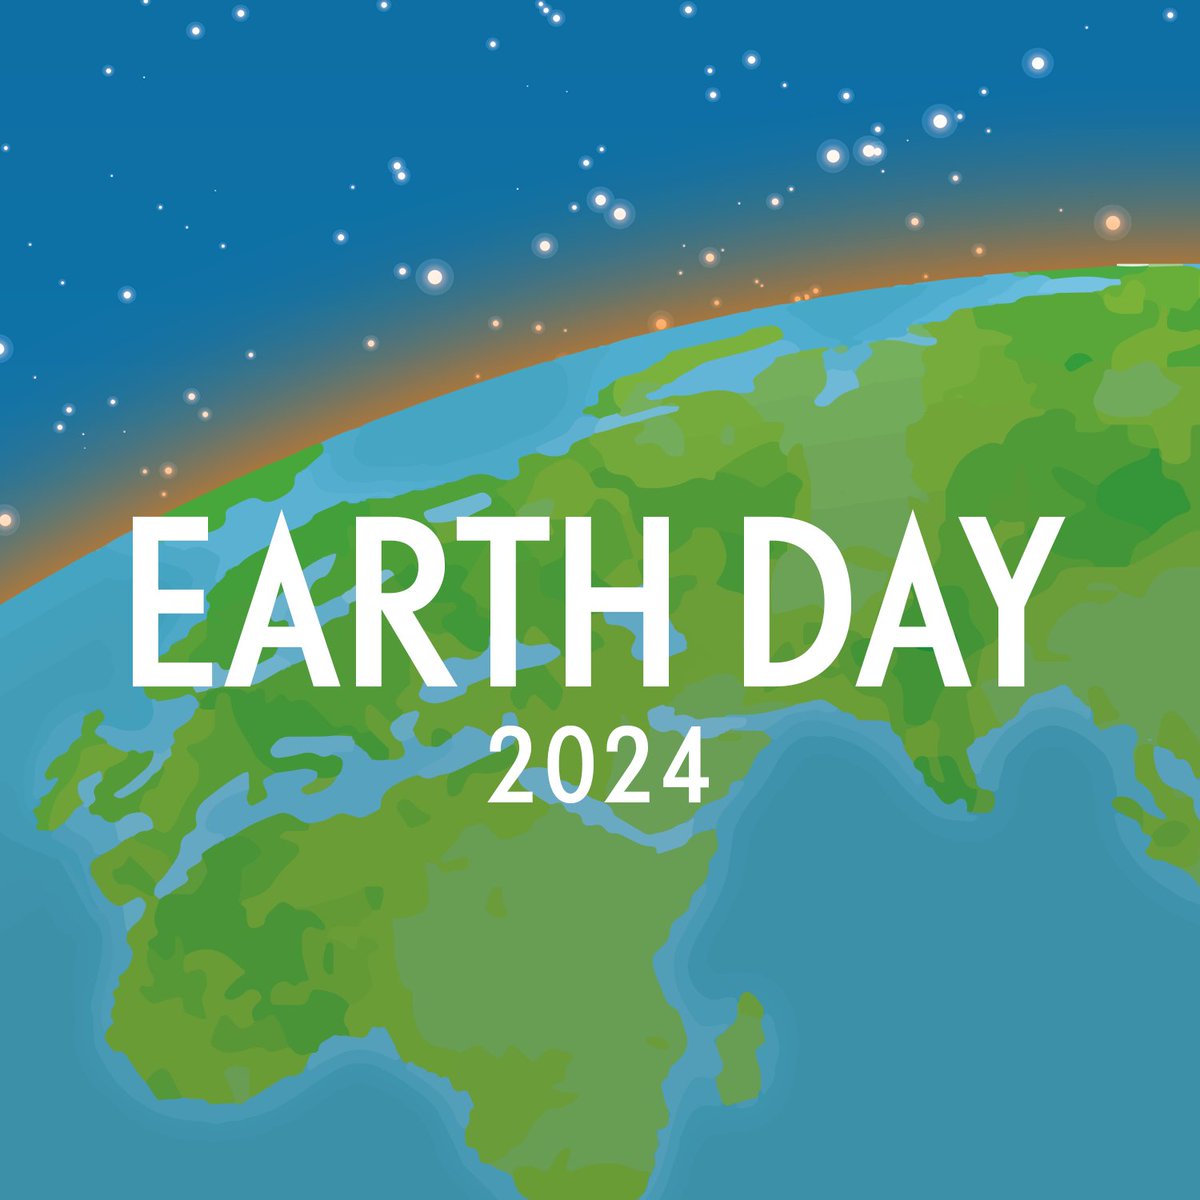 It's Earth Day! Learn more about Earth Day, and how you can reduce your carbon footprint below! 🌍 👉 earthday.org